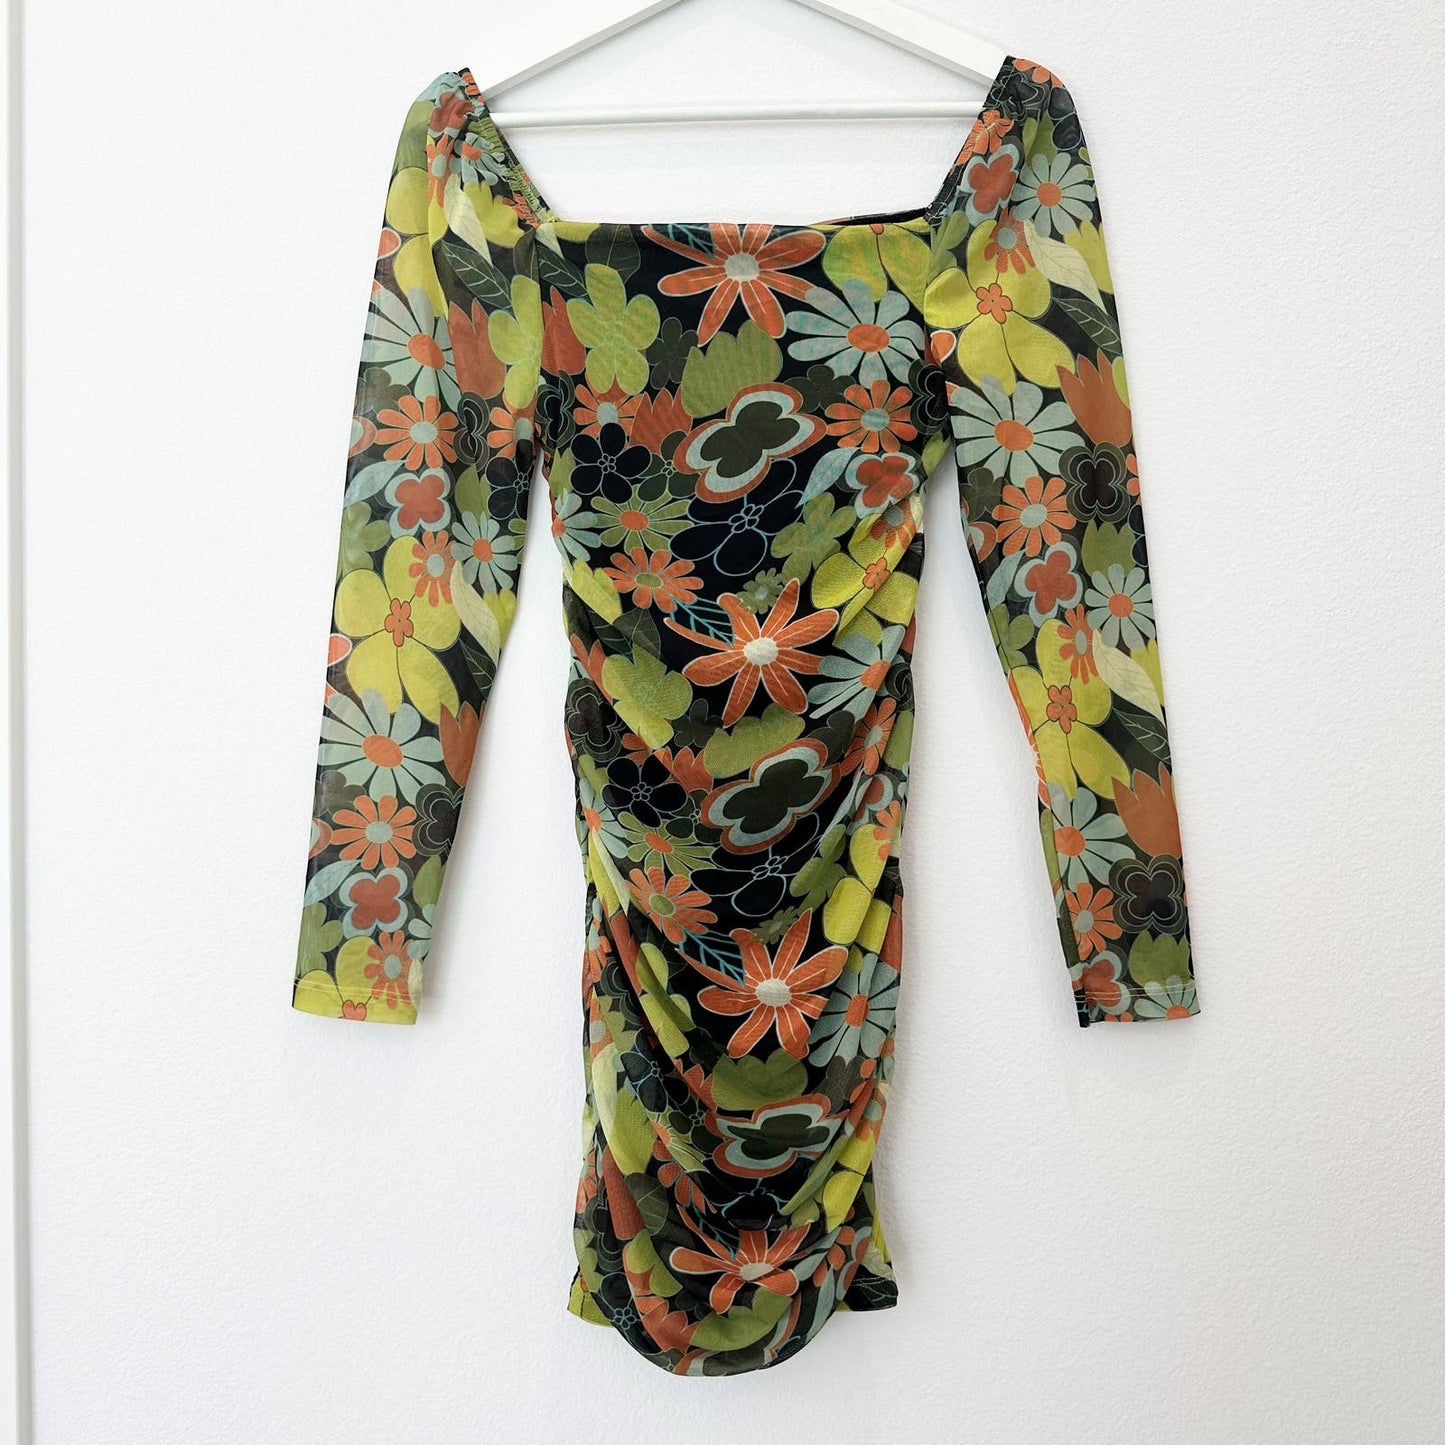 Nasty Gal retro mesh floral ruched long sleeve dress